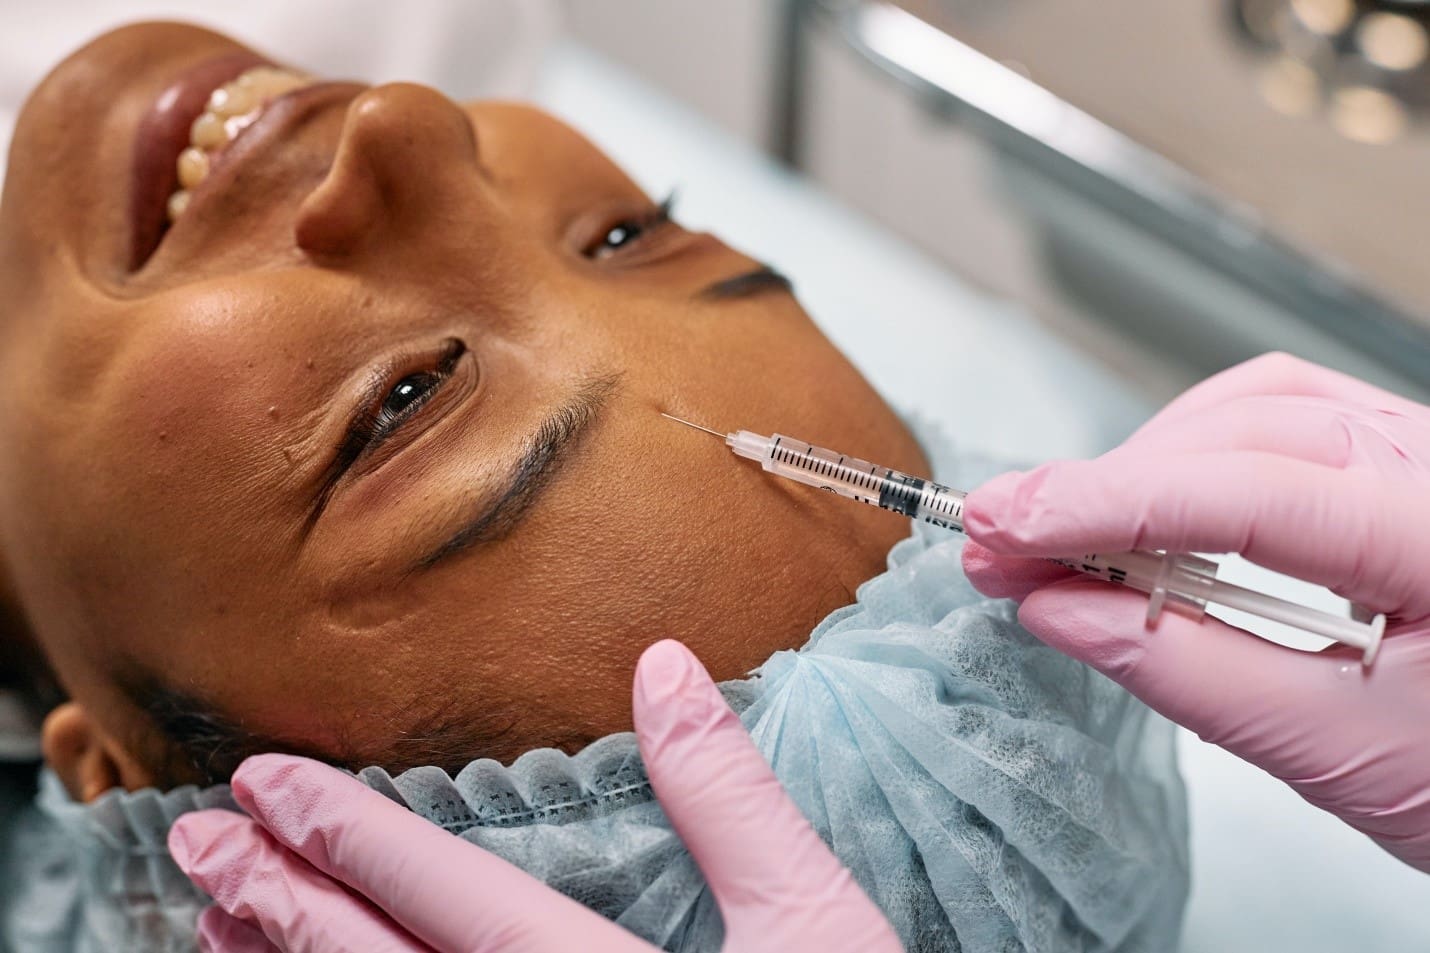 botox myths and misconceptions